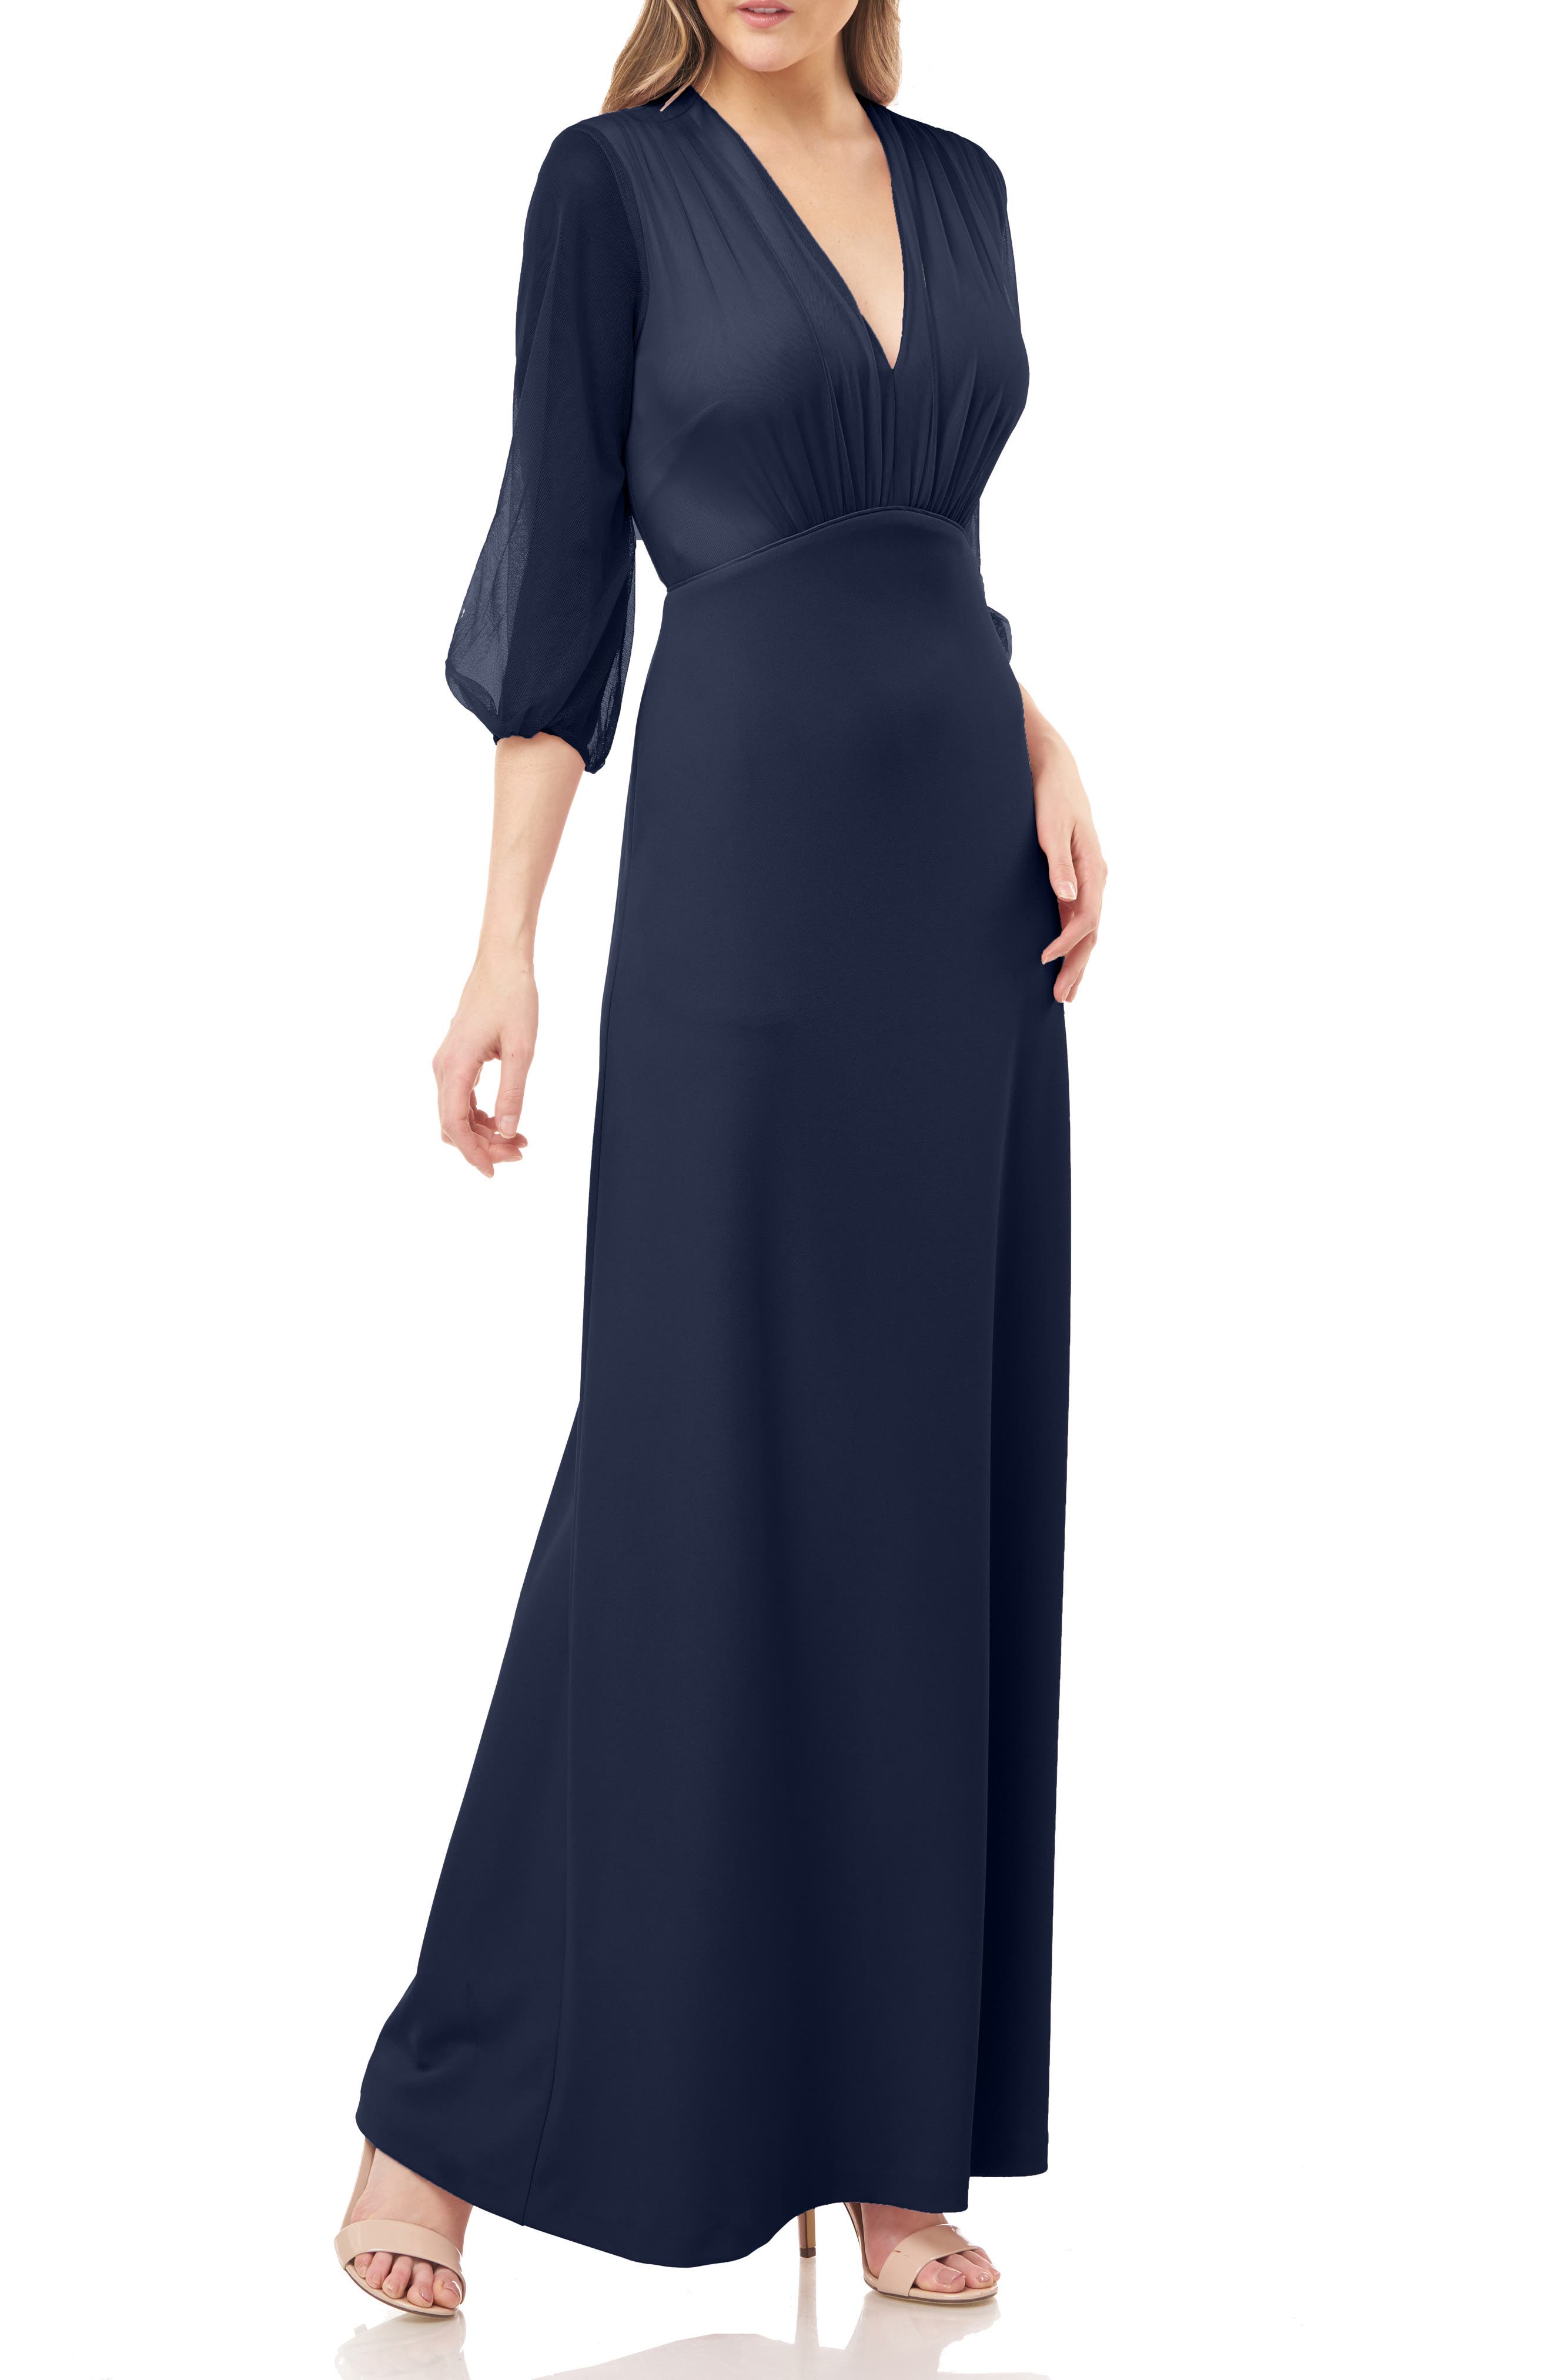 places to buy formal dresses near me